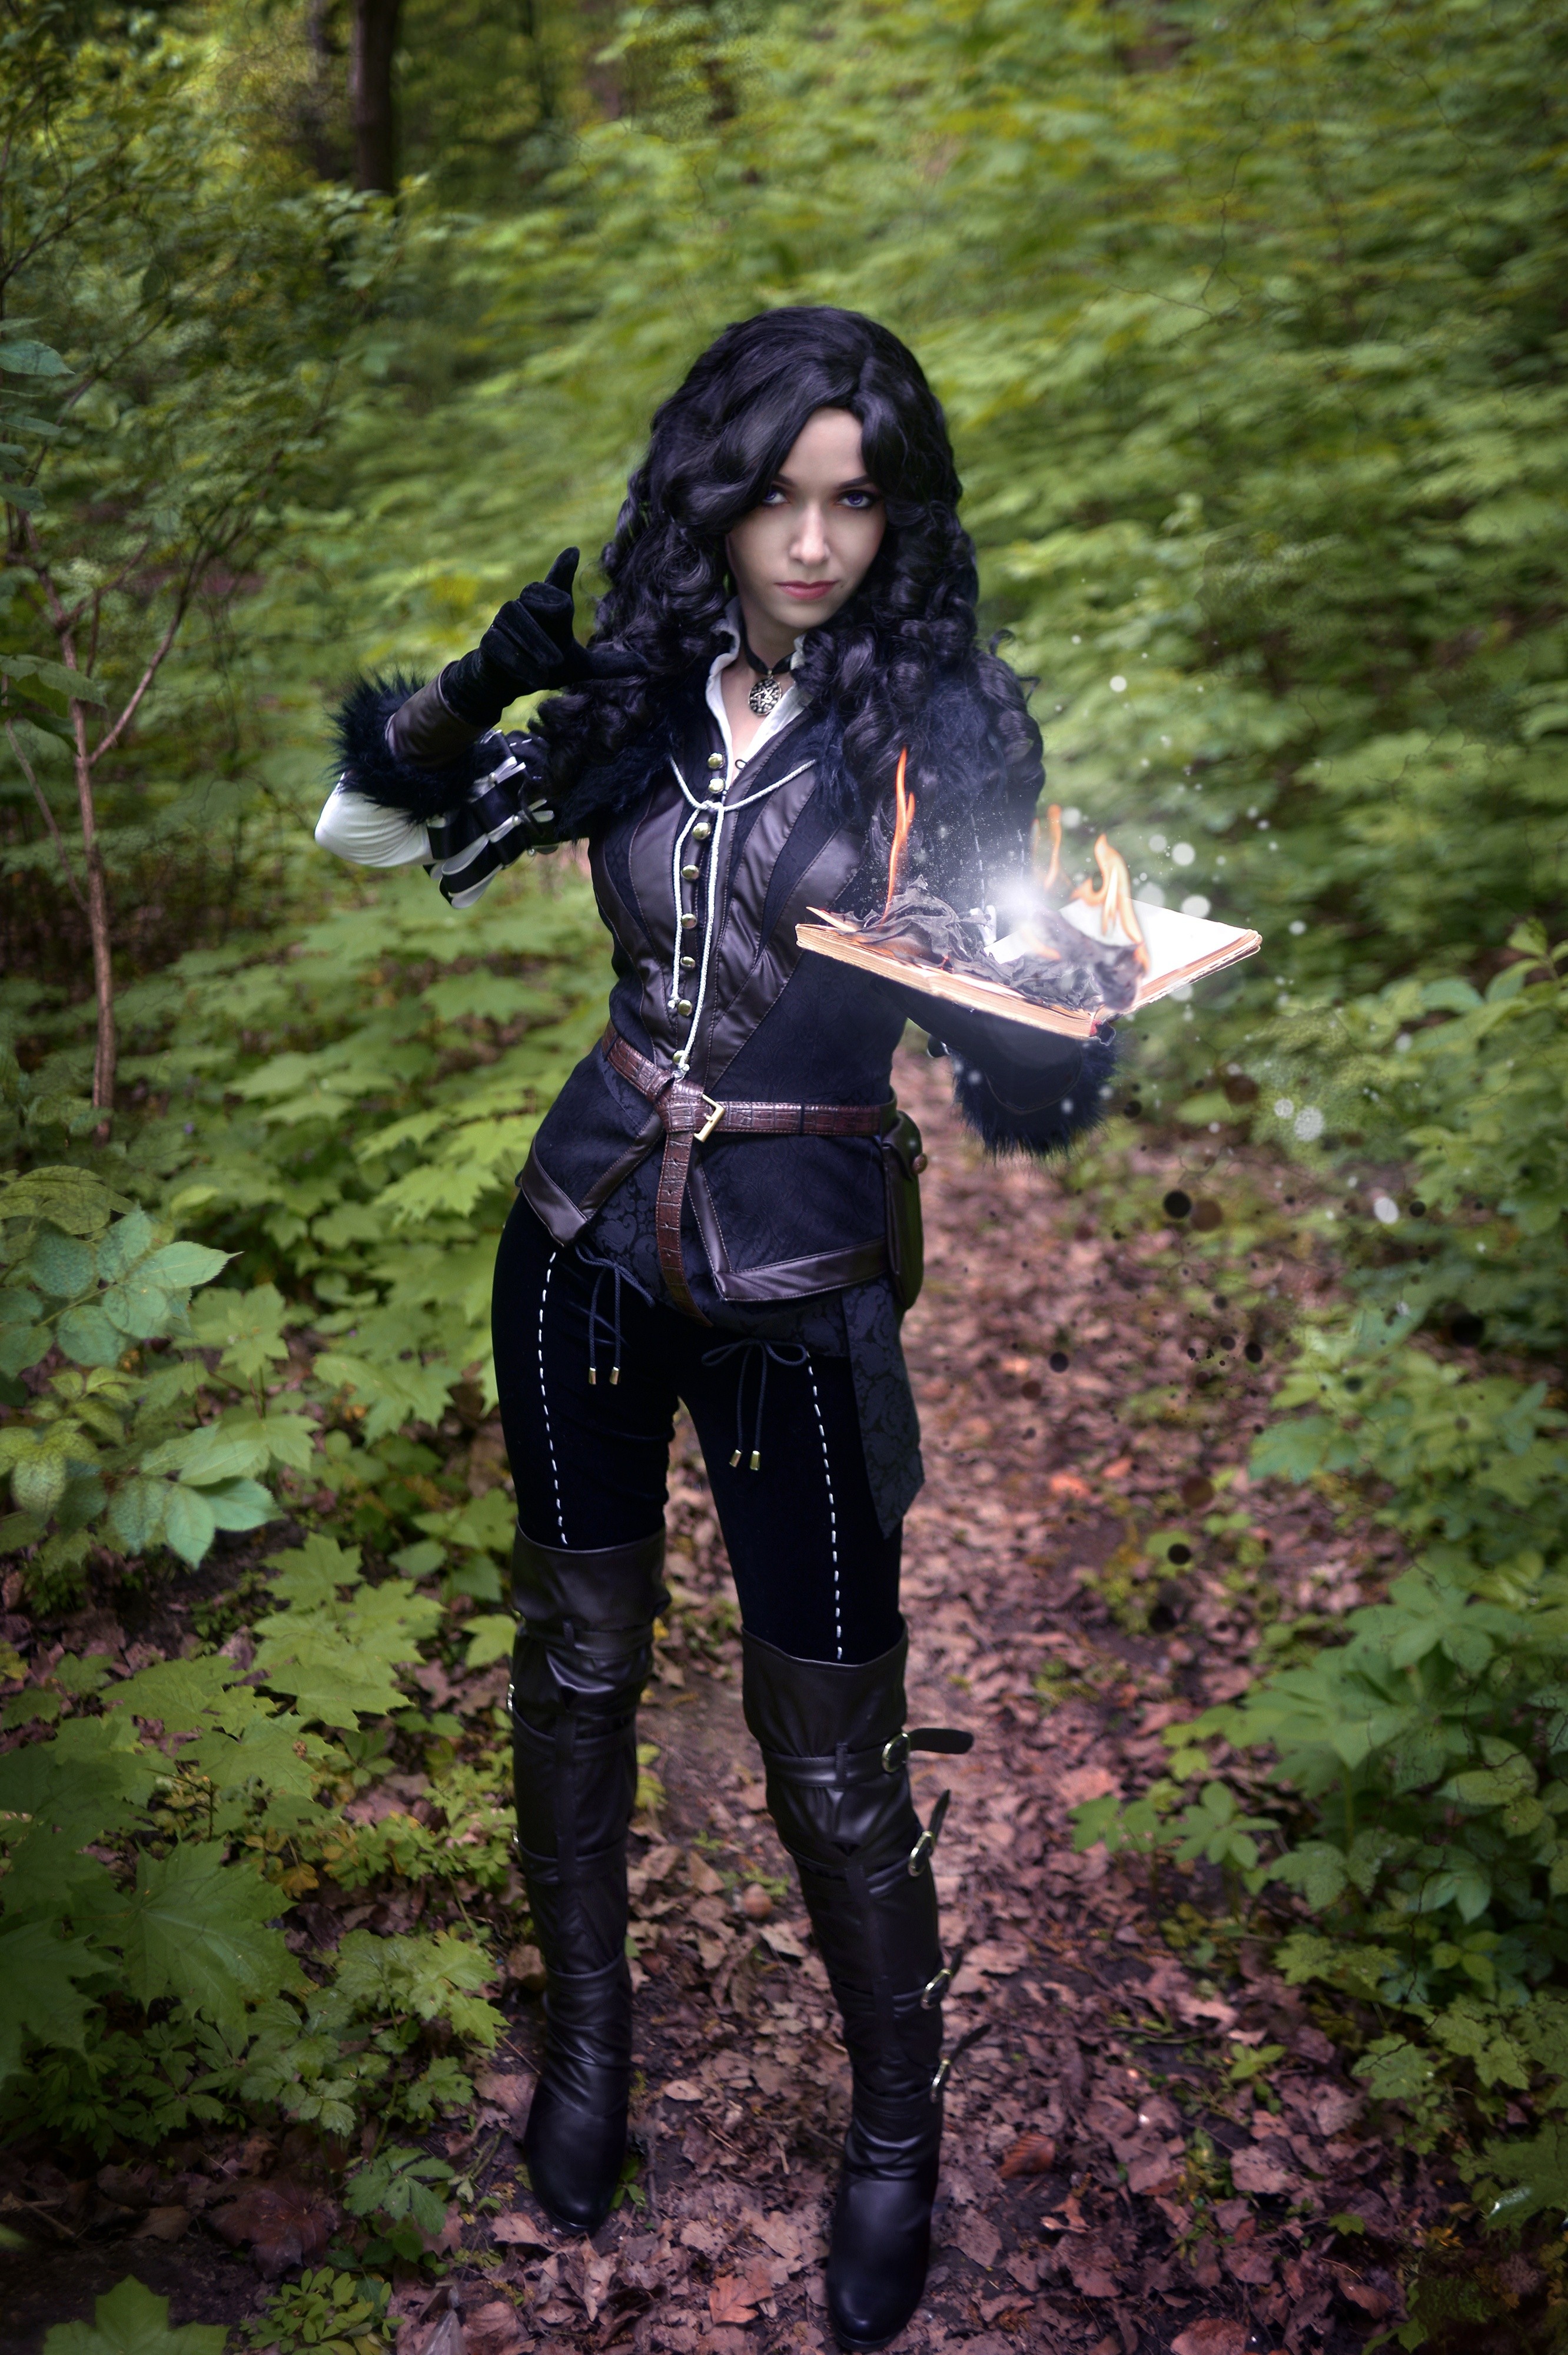 People 2664x4000 The Witcher 3: Wild Hunt Yennefer of Vengerberg cosplay knee-high boots video game characters women model fire magic black hair women outdoors outdoors standing costumes video game girls